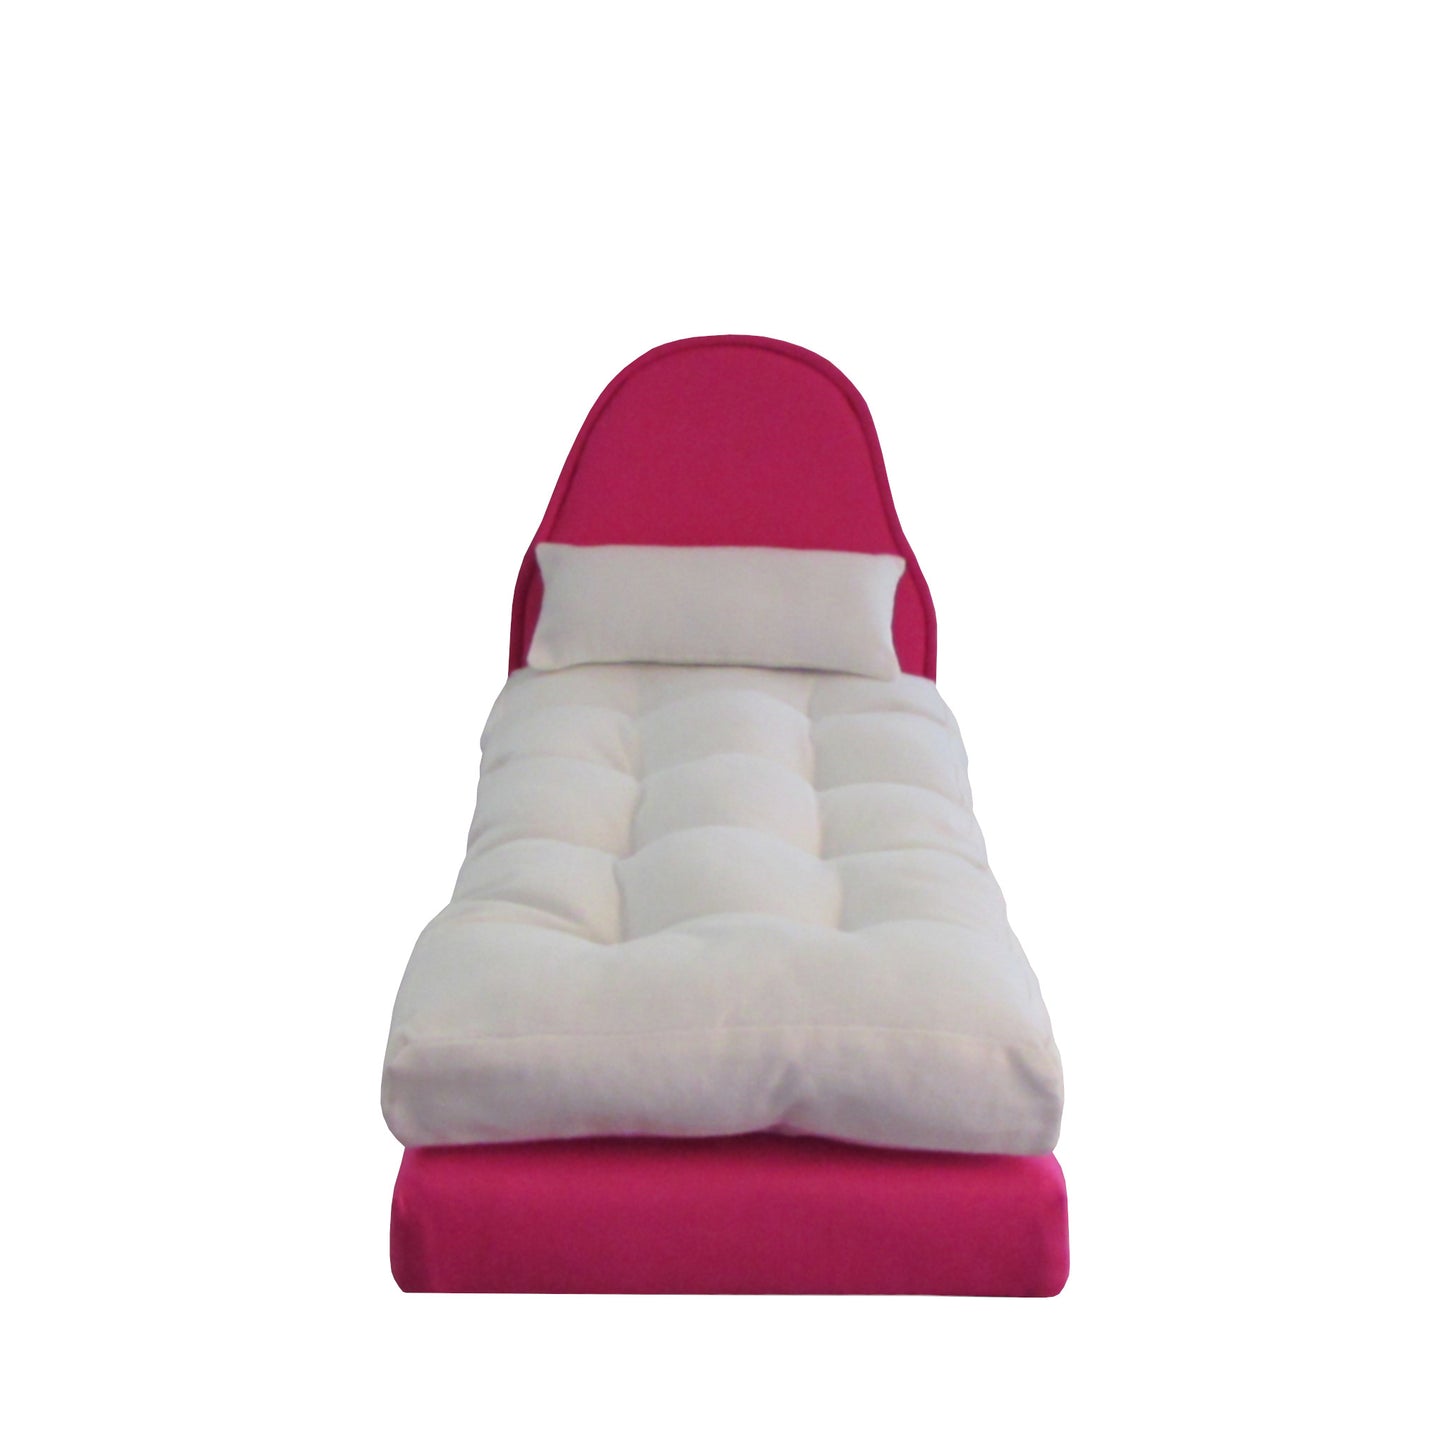 Upholstered Bright Pink Doll Bed with Pillow for 11.5-inch and 12-inch dolls Second view